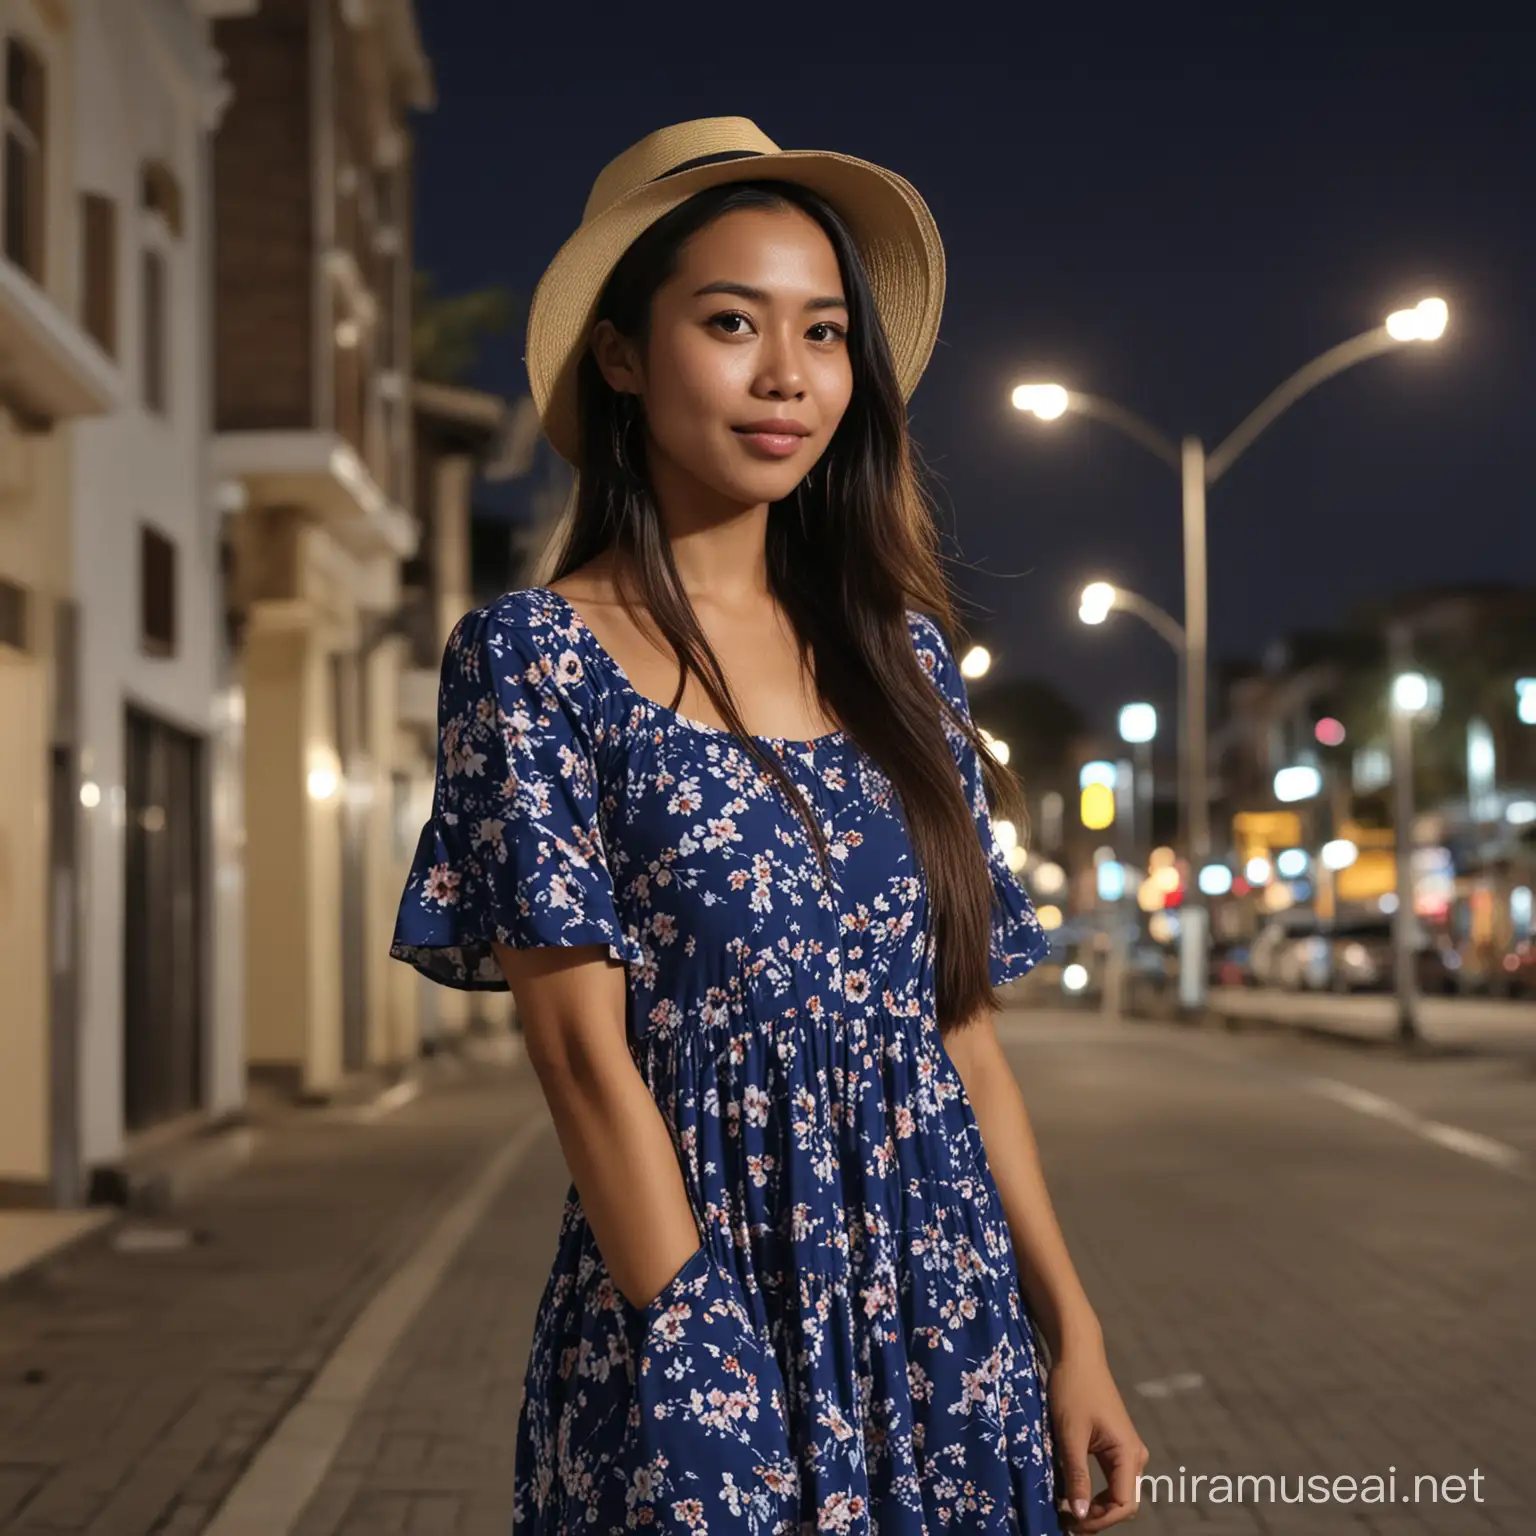 Stylish Indonesian Woman Posing in Blue Floral Dress at Night in Kincir Angin City